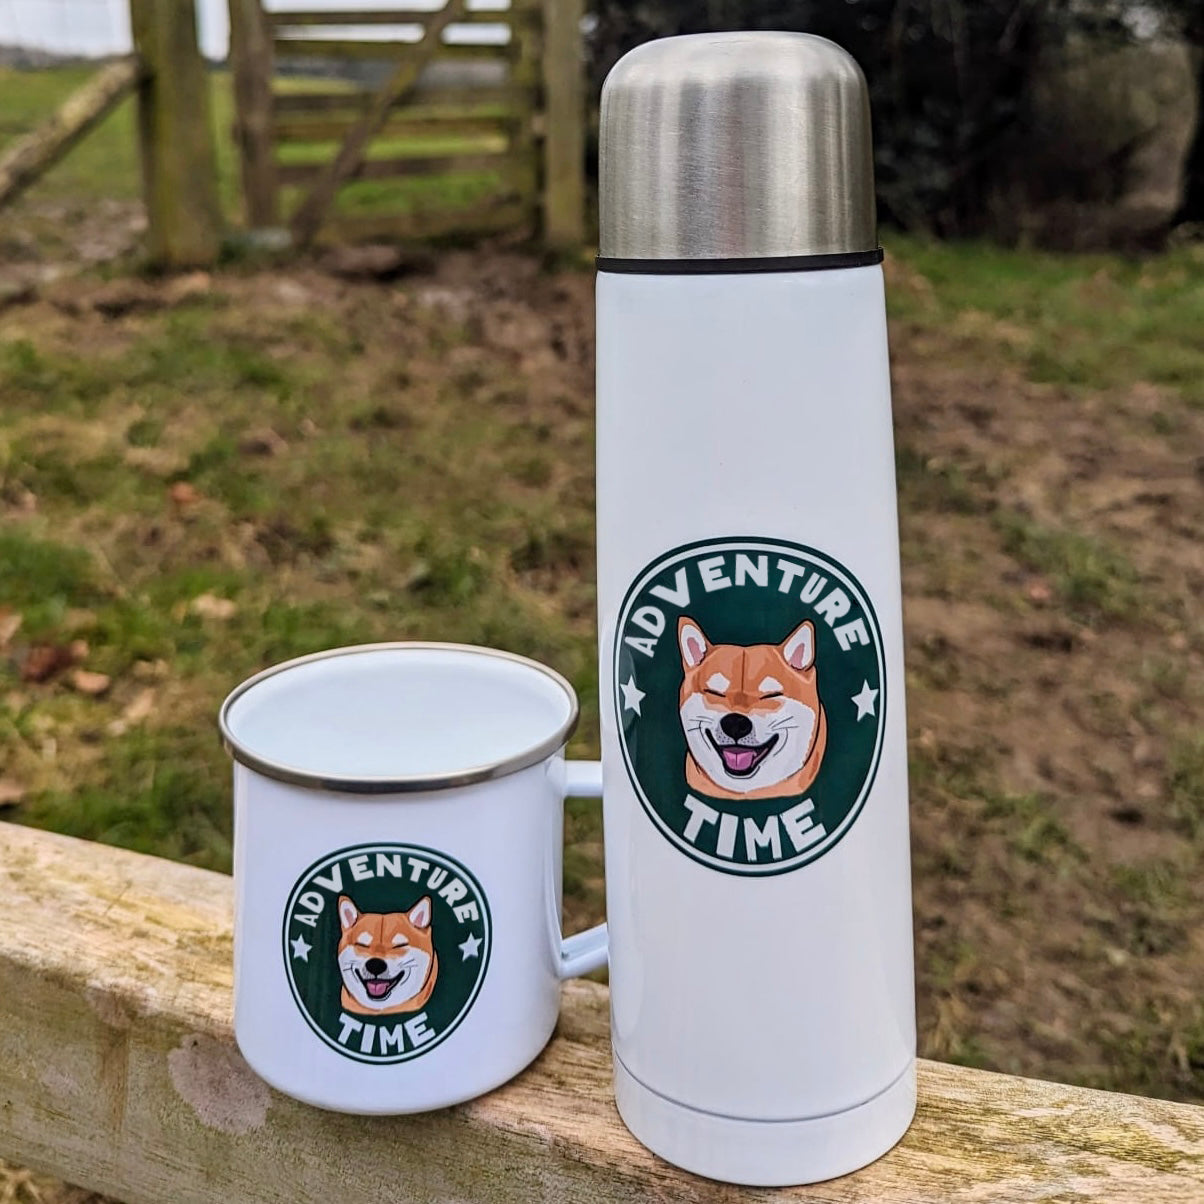 Pawventure Flask and Cup Set